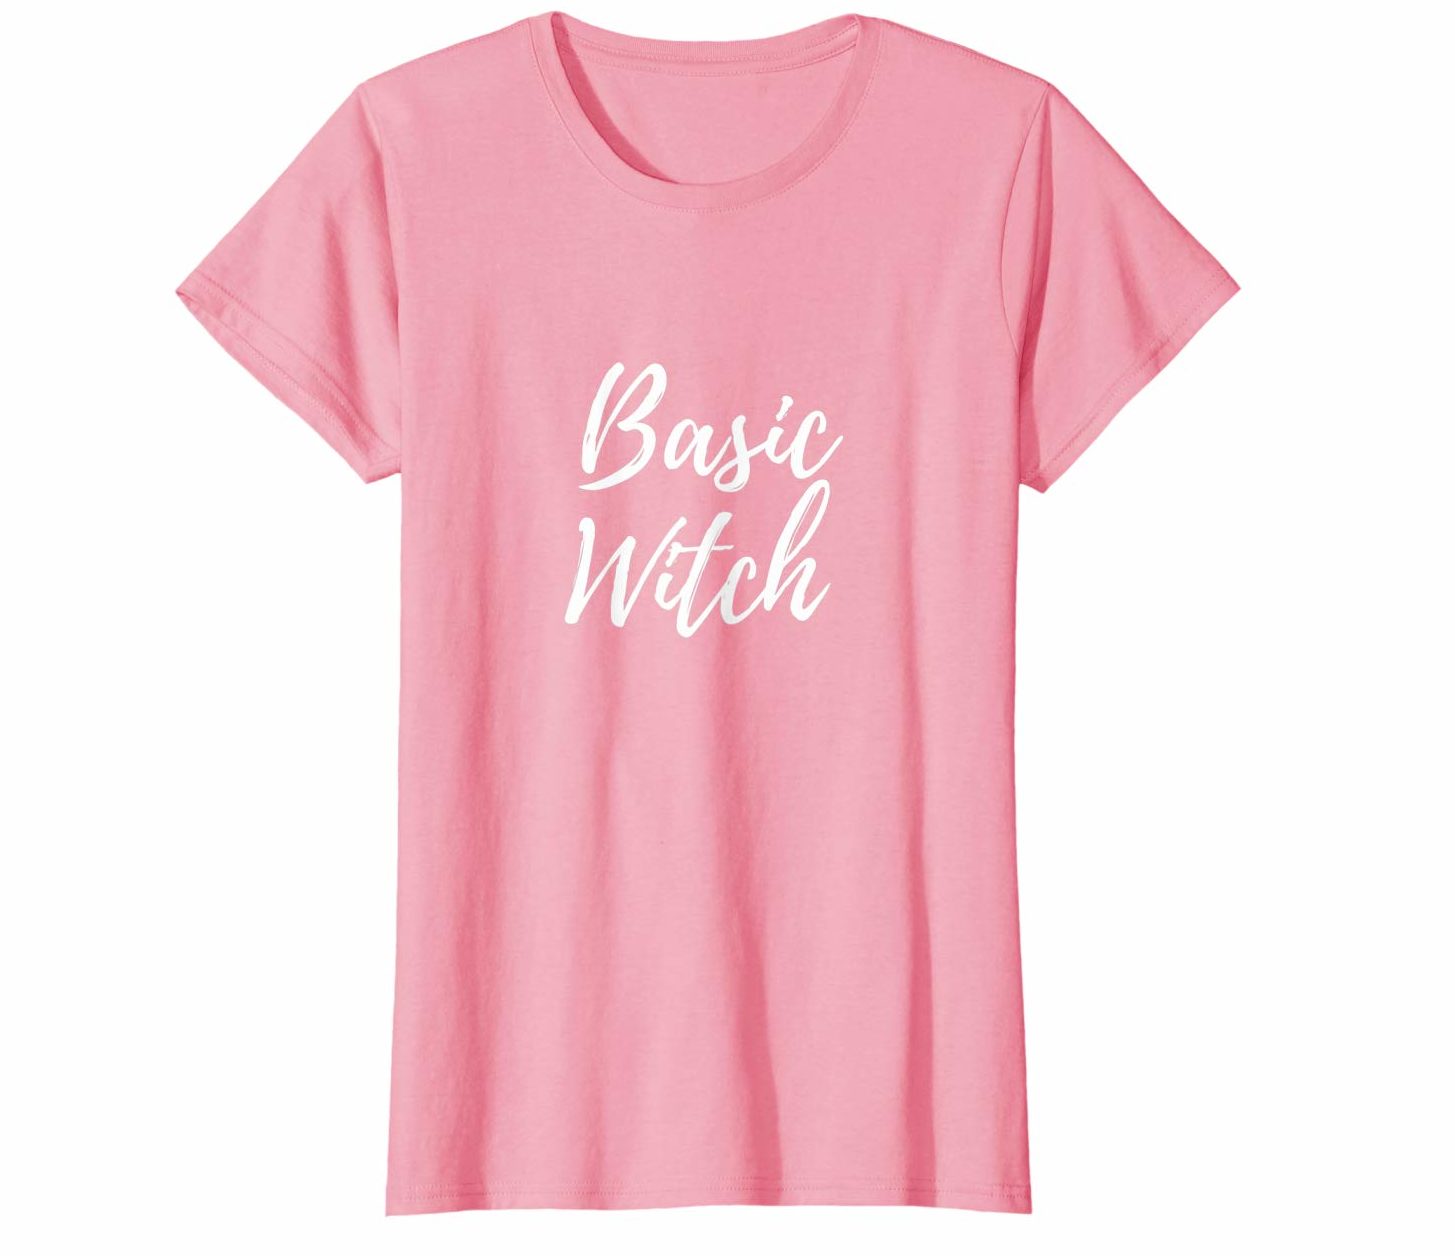 Funny Halloween Shirts 2023: Basic Witch T-Shirt for Women 2023